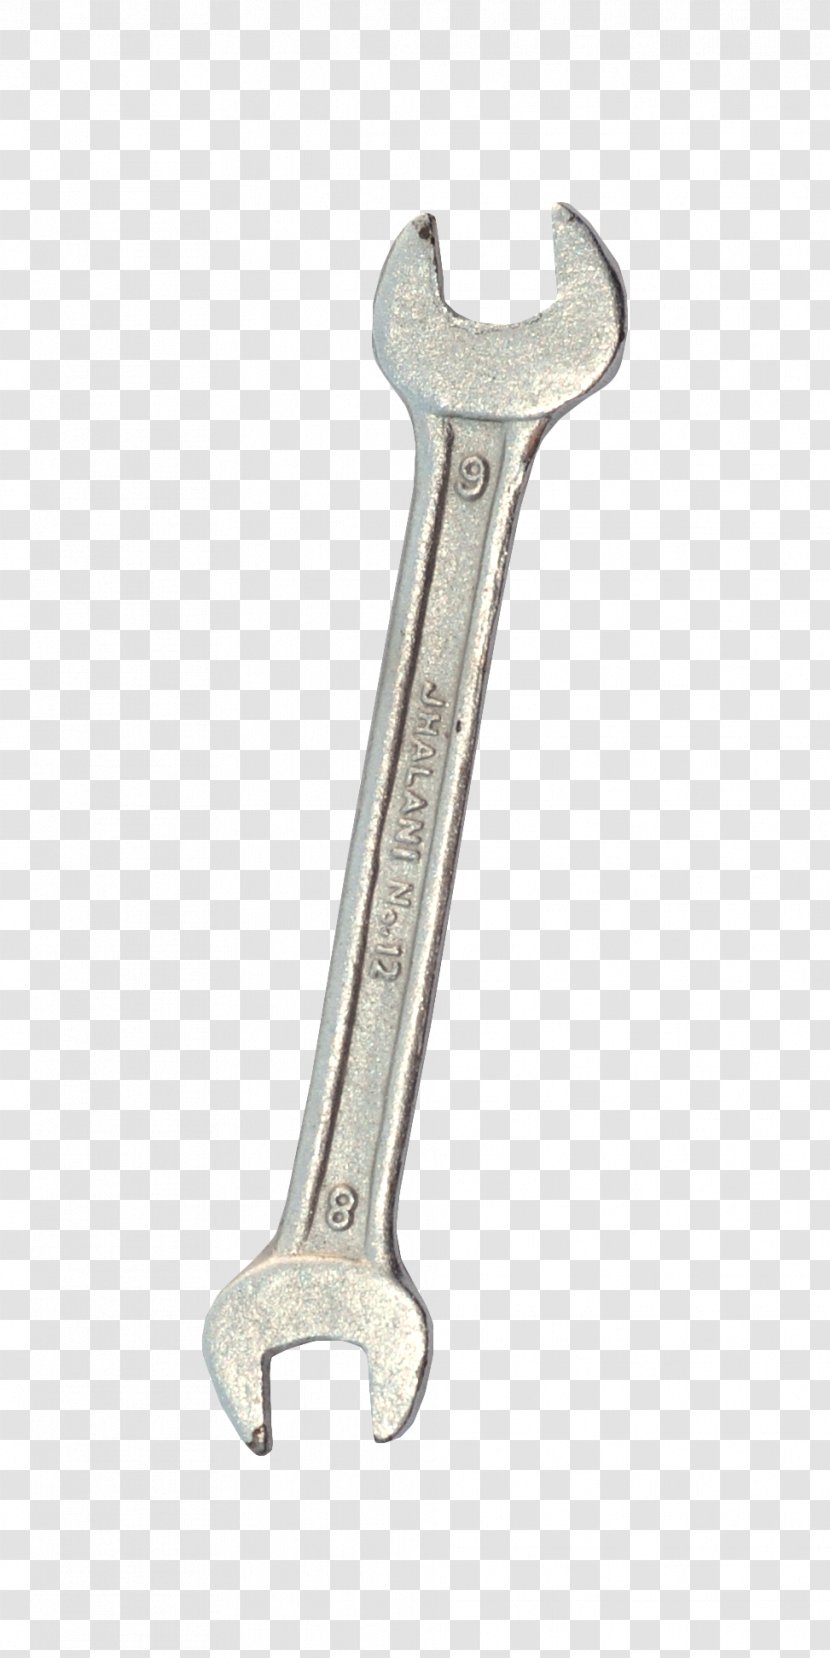 Adjustable Spanner Metal Wrench - Hardware Accessory - Material Free To Pull Transparent PNG